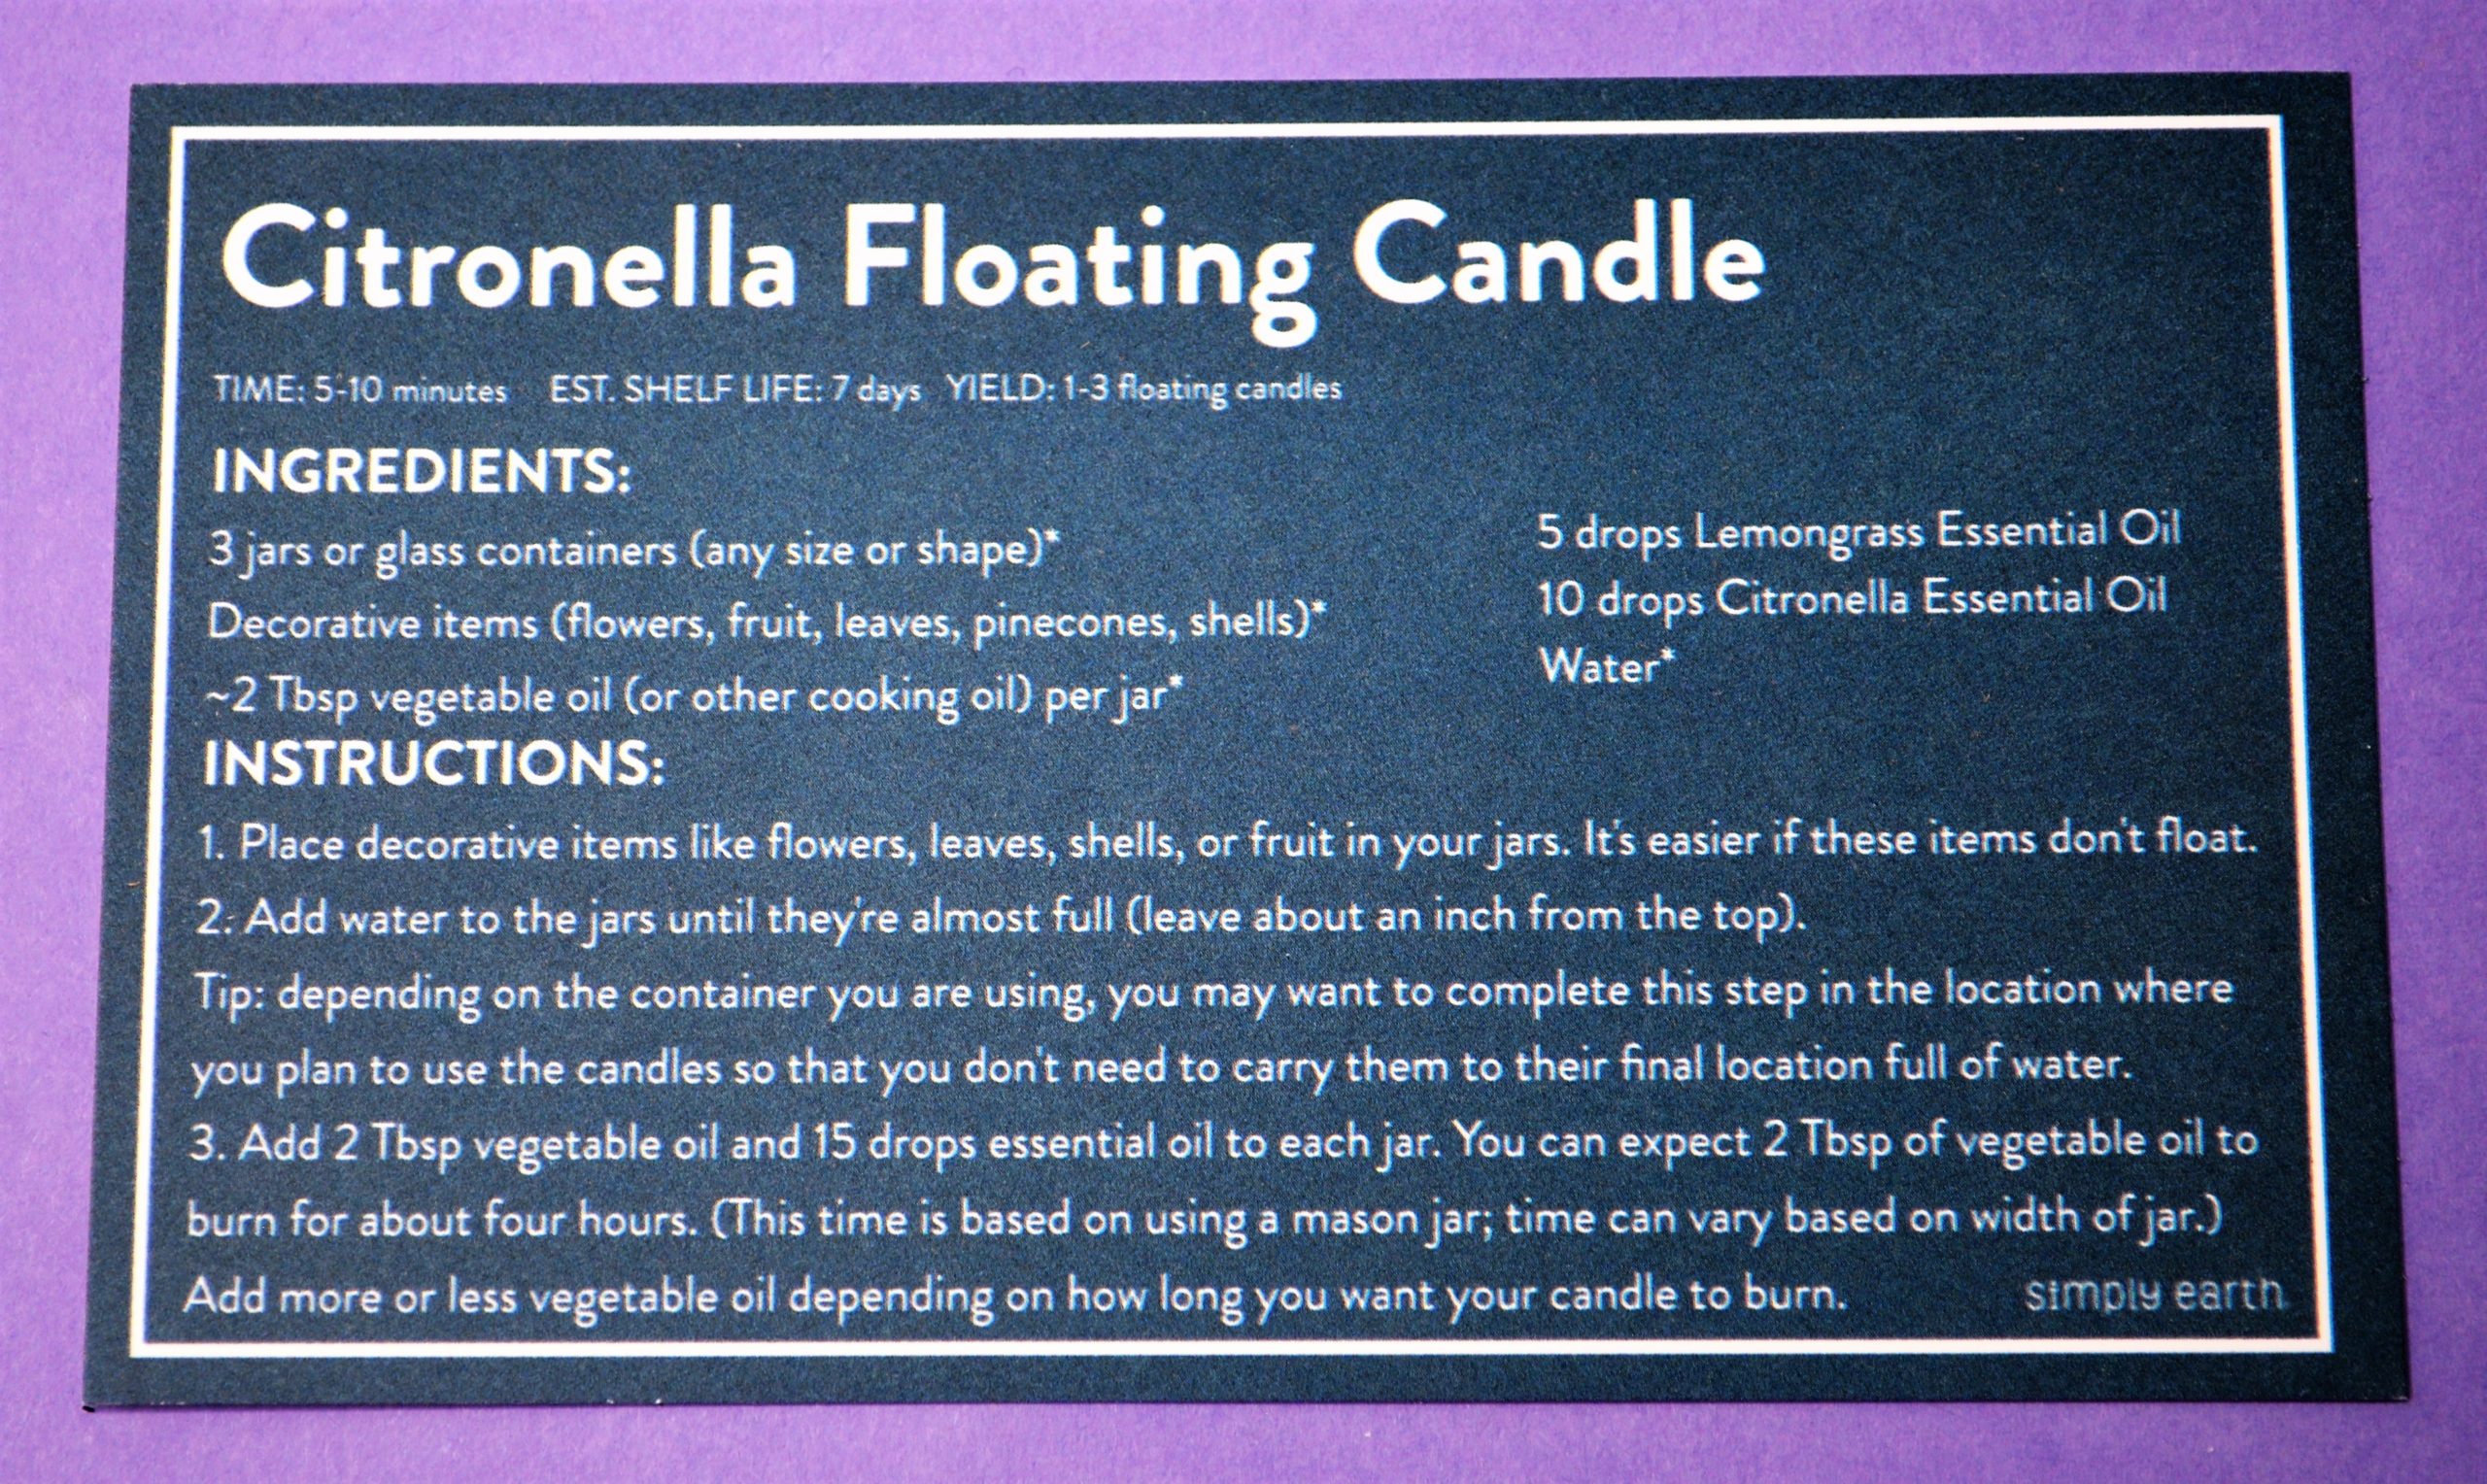 Simply Earth Citronella Floating Candle Recipe